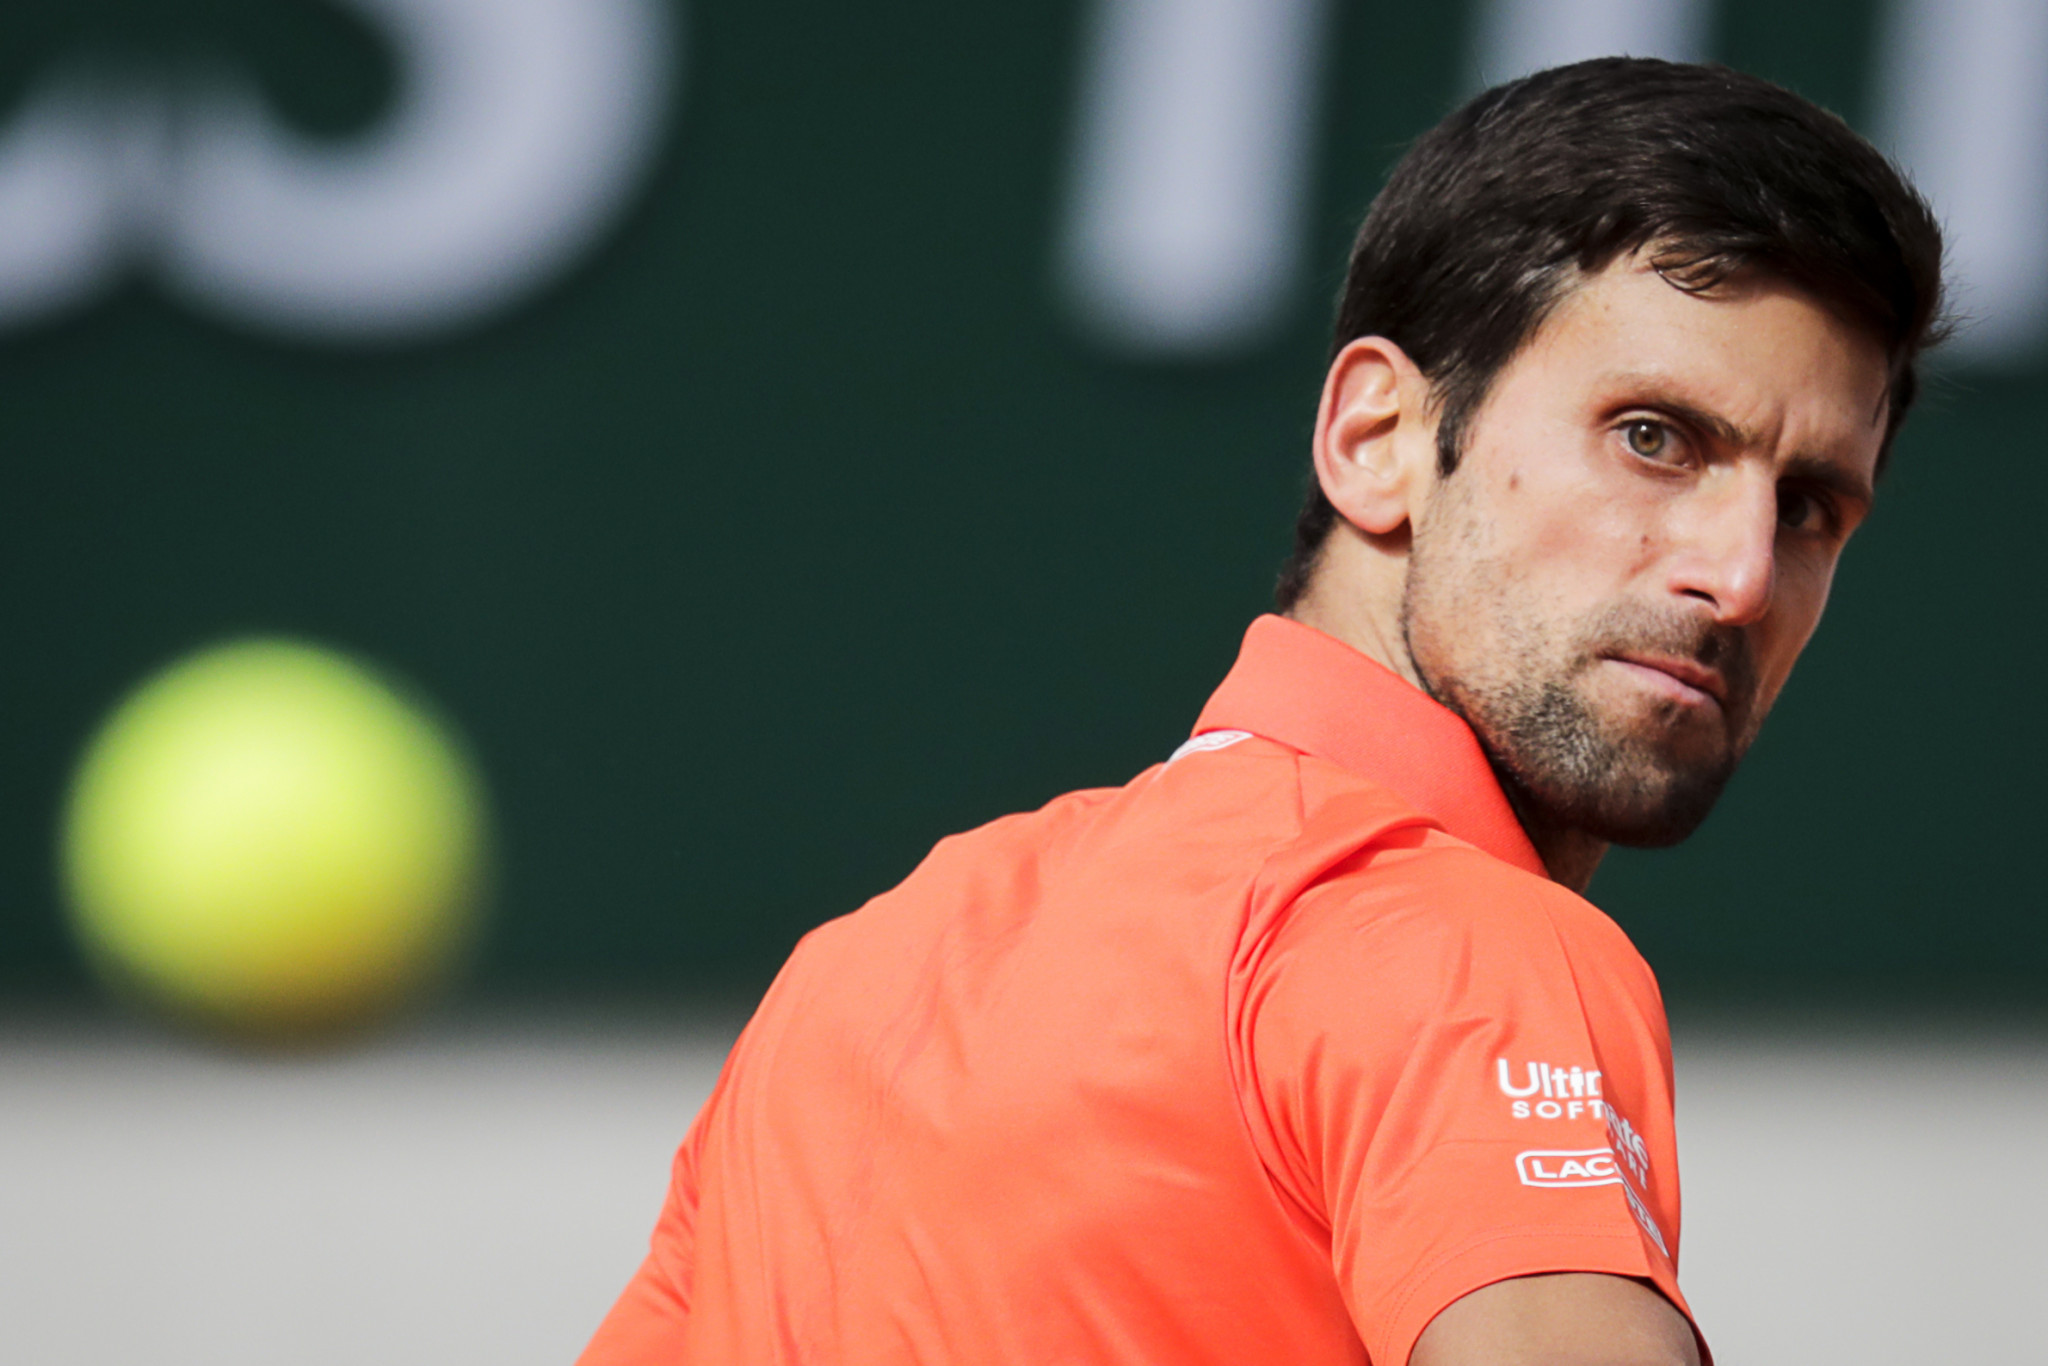 Top seed Novak Djokovic started his French Open campaign with a straight-sets win over Poland's Hubert Hurkacz in Paris today ©Getty Images